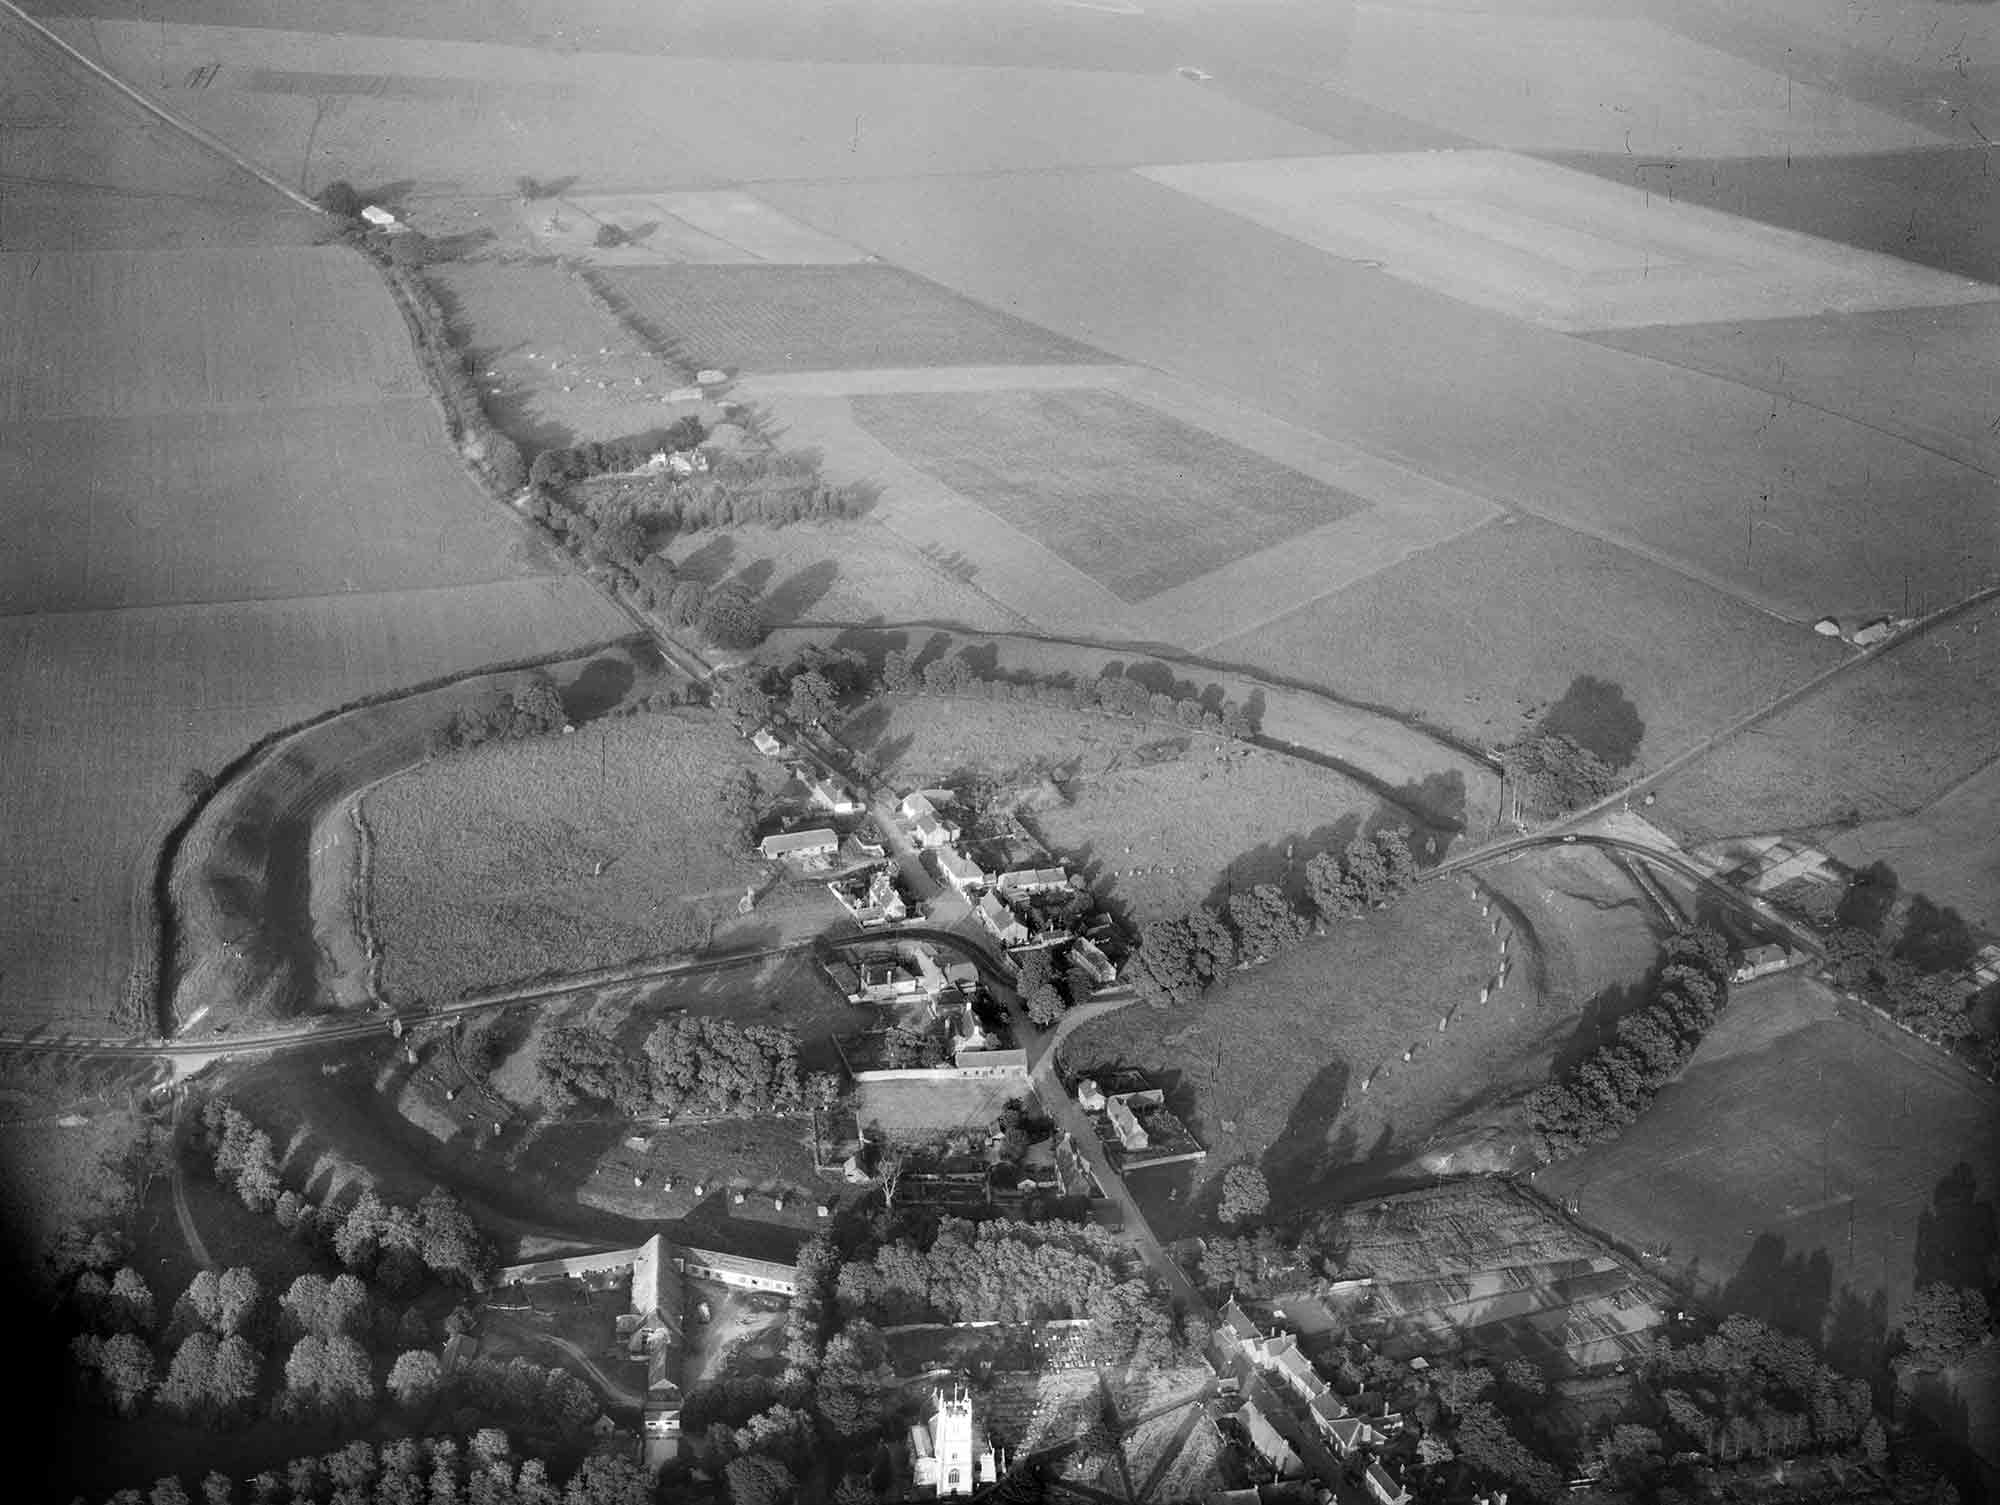 Black and white oblique aerial photograph of part of a village and a circular henge enclosure featuring inner and outer ditches on either side of a grassy bank. The upper half of the photograph features multiple fields and a tree-lined road or track heading into the distance.